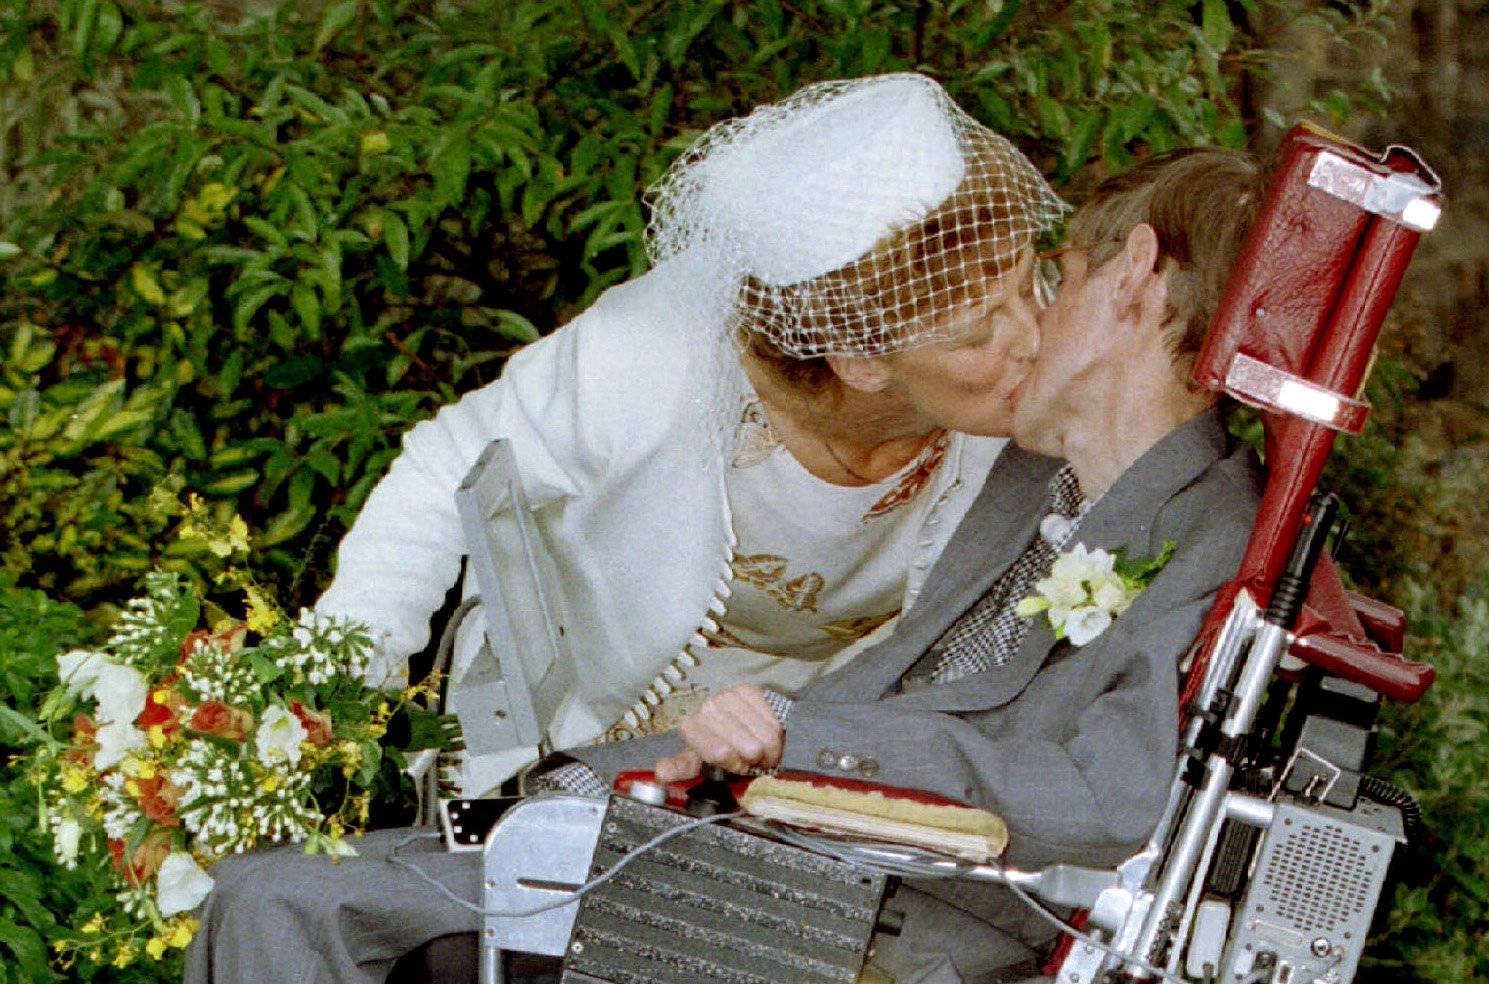 A kiss for scientist and theorist Stephen Hawking from his new bride Elaine Mason after their civil ..